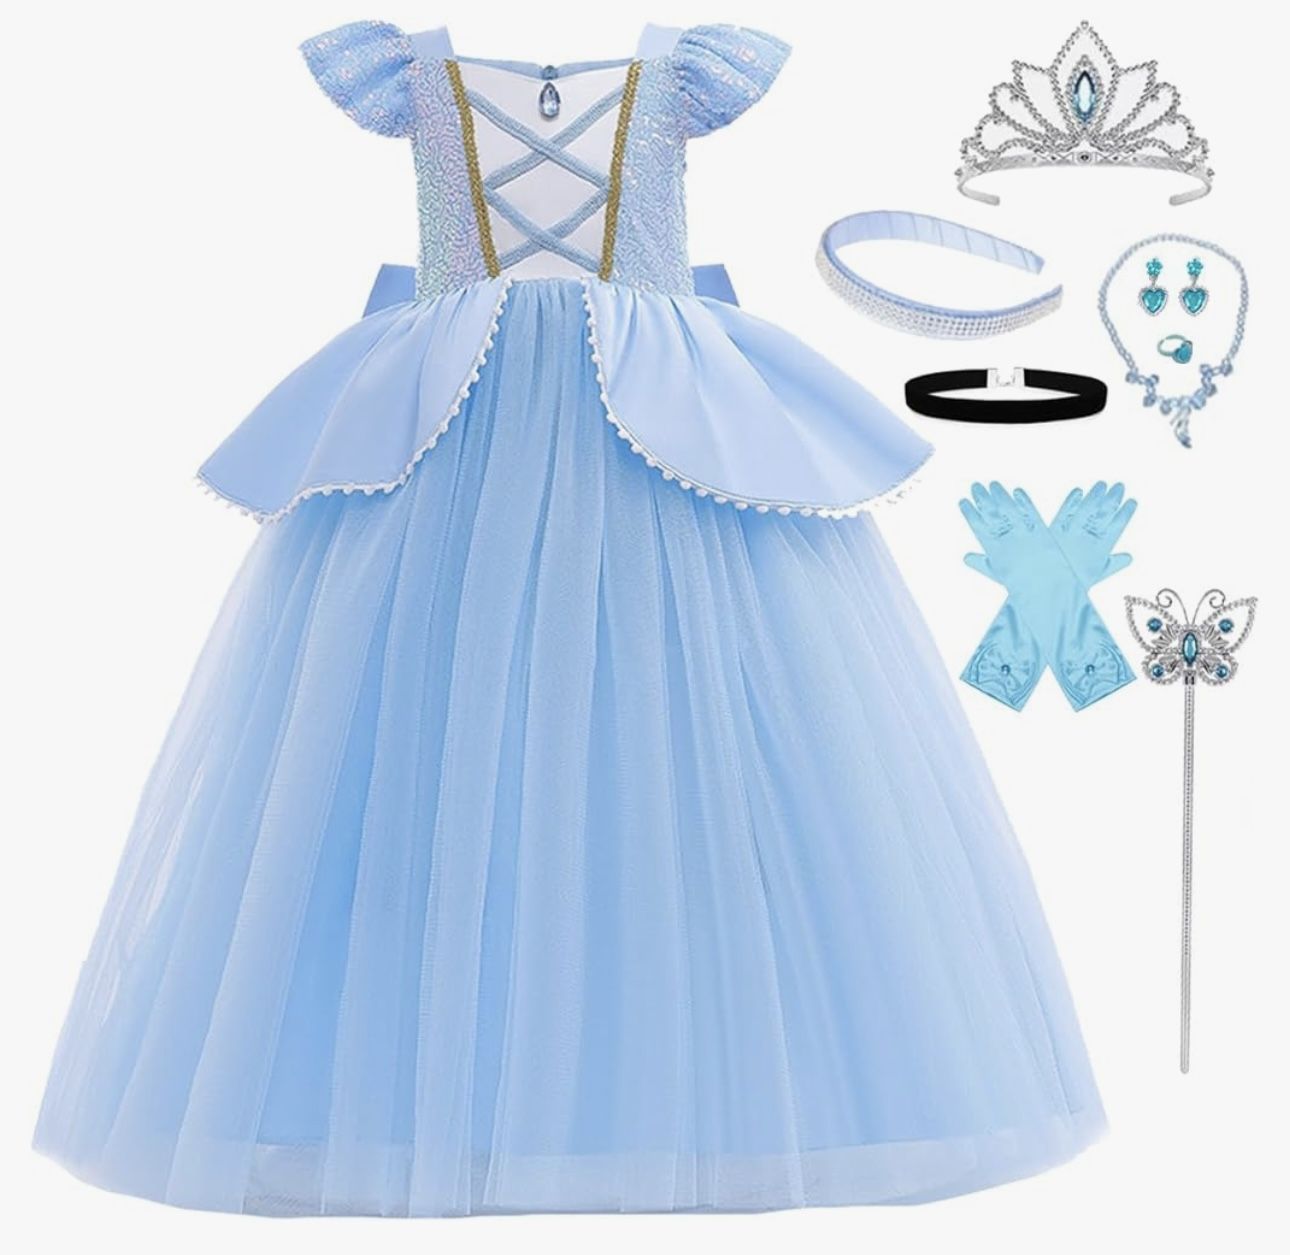 Cinderella Fancy Dress And Accessories 